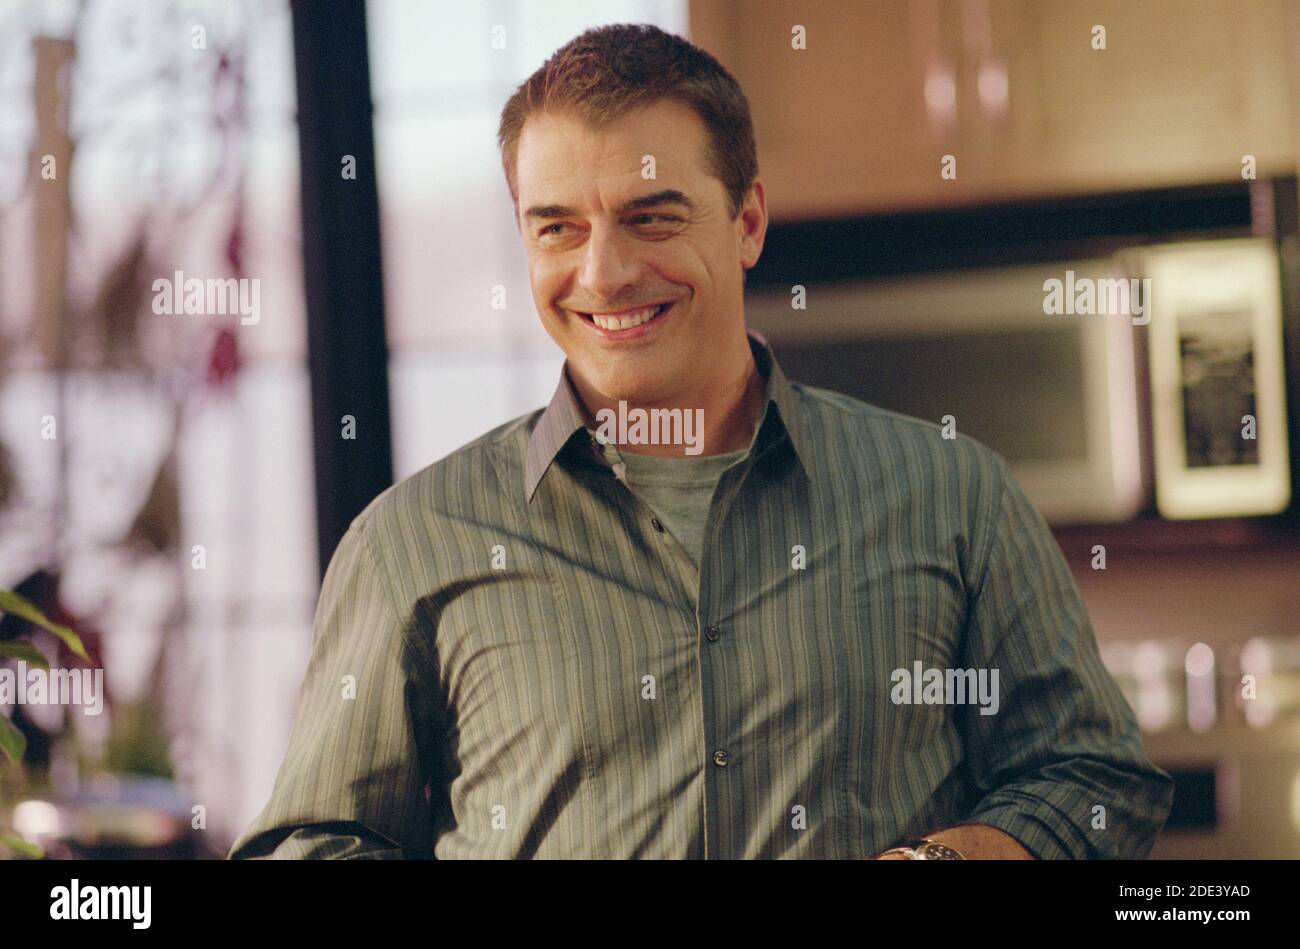 Chris Noth, 'The Perfect Man' (2005)  Photo credit: Sophie Giraud/Universal Studios/The Hollywood Archive / File Reference # 34078-0608FSTHA Stock Photo